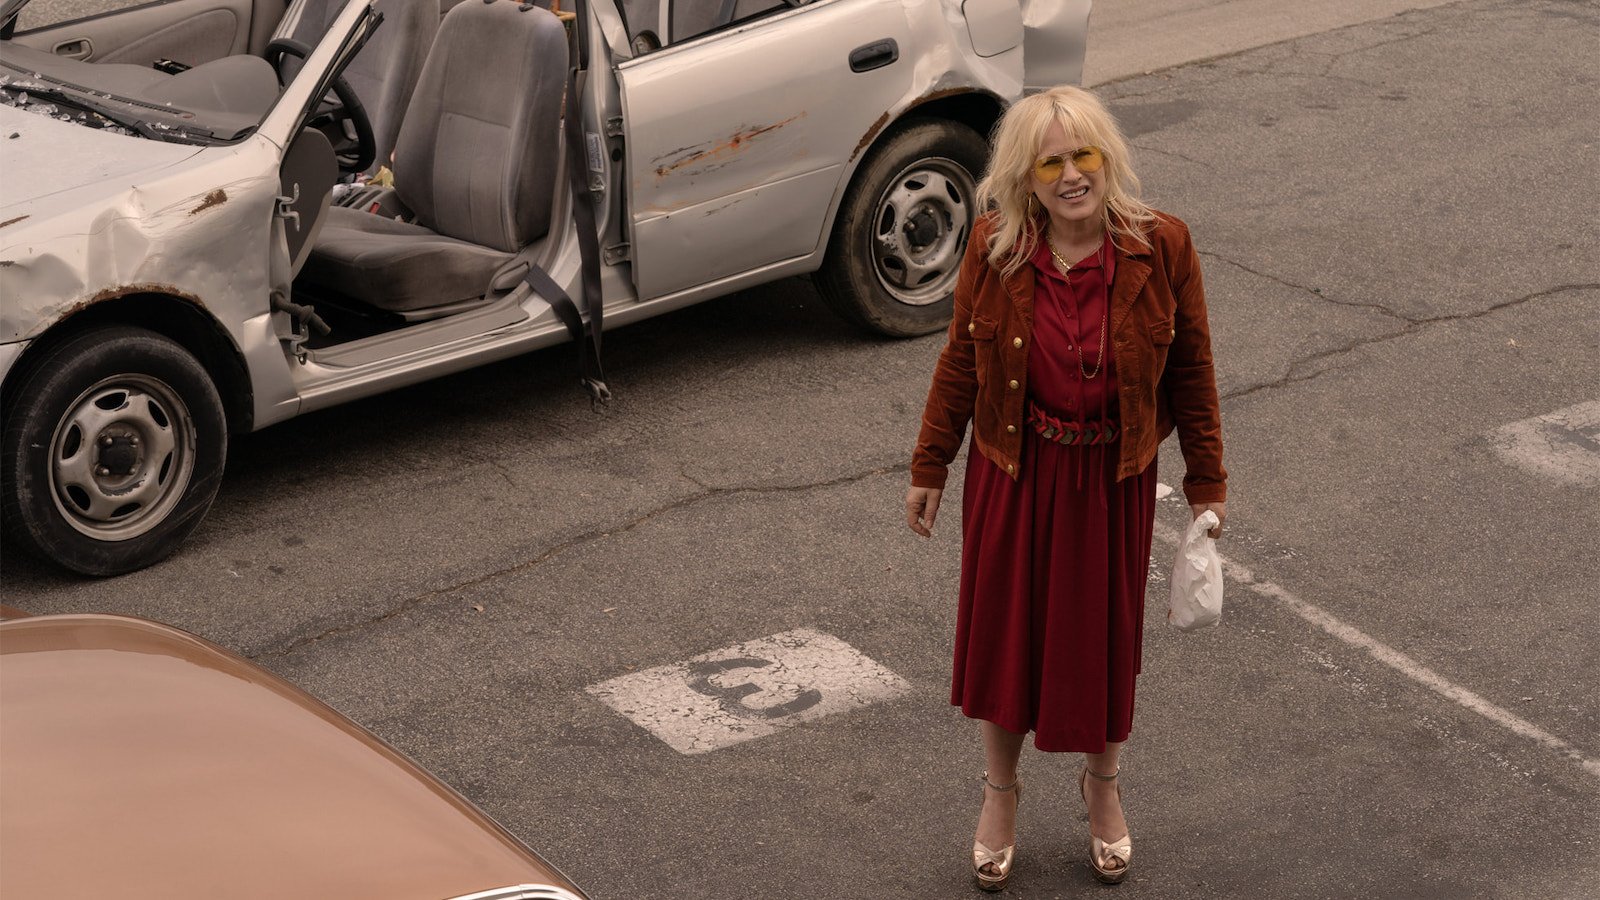 High Desert: Patricia Arquette changes her life in the trailer of the Apple TV+ series